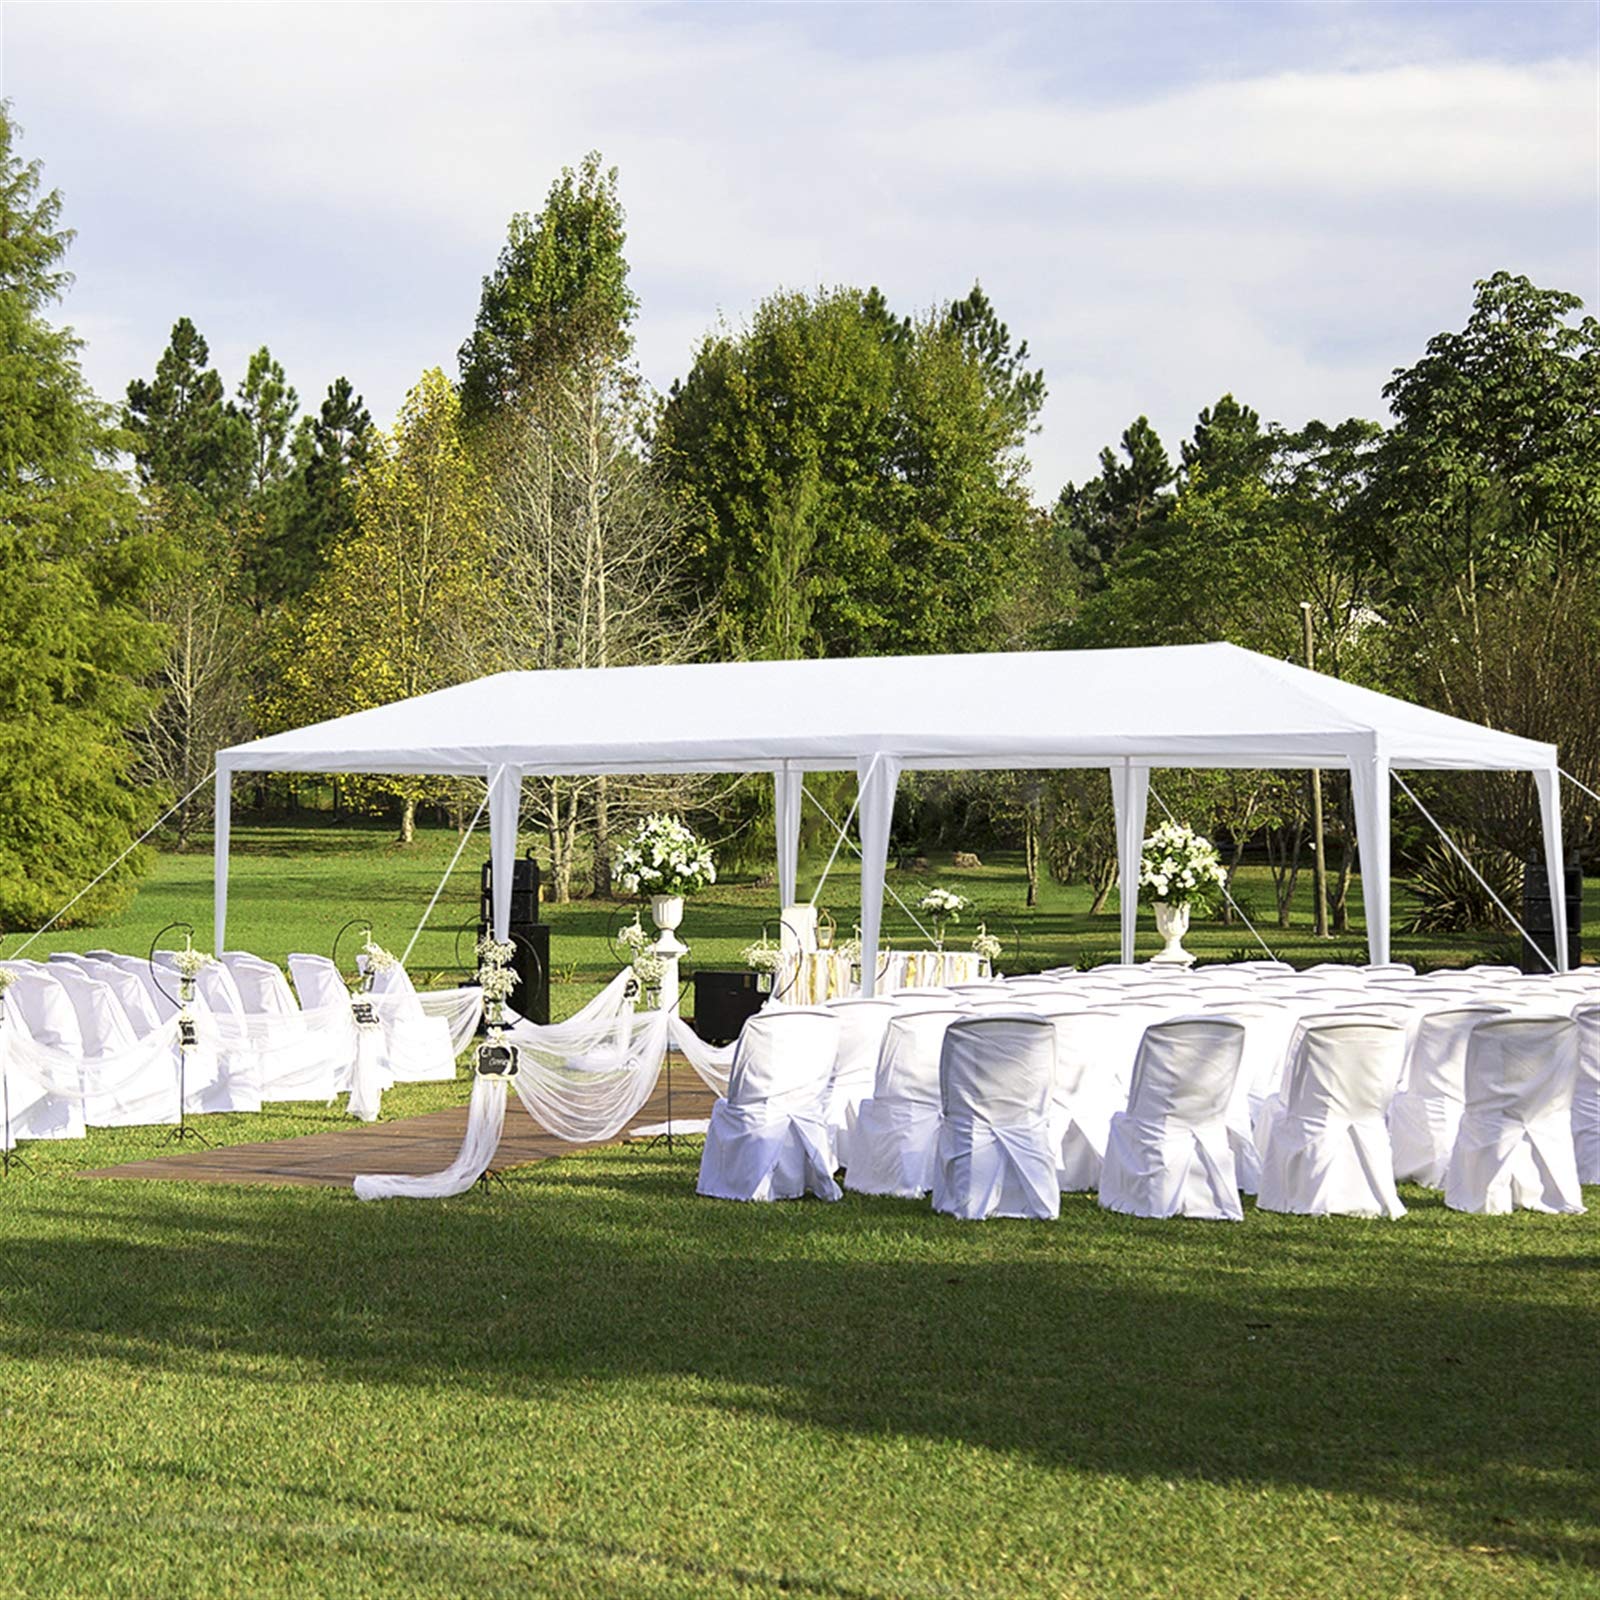 Party Tent 10 x 30' for Parties Heavy Duty Outdoor Wedding Tent White Large Patio Gazebo Carport Canopy Shade, 8-Sided Tents Removable Walls, Perfect for Birthday,Graduation,BBQ